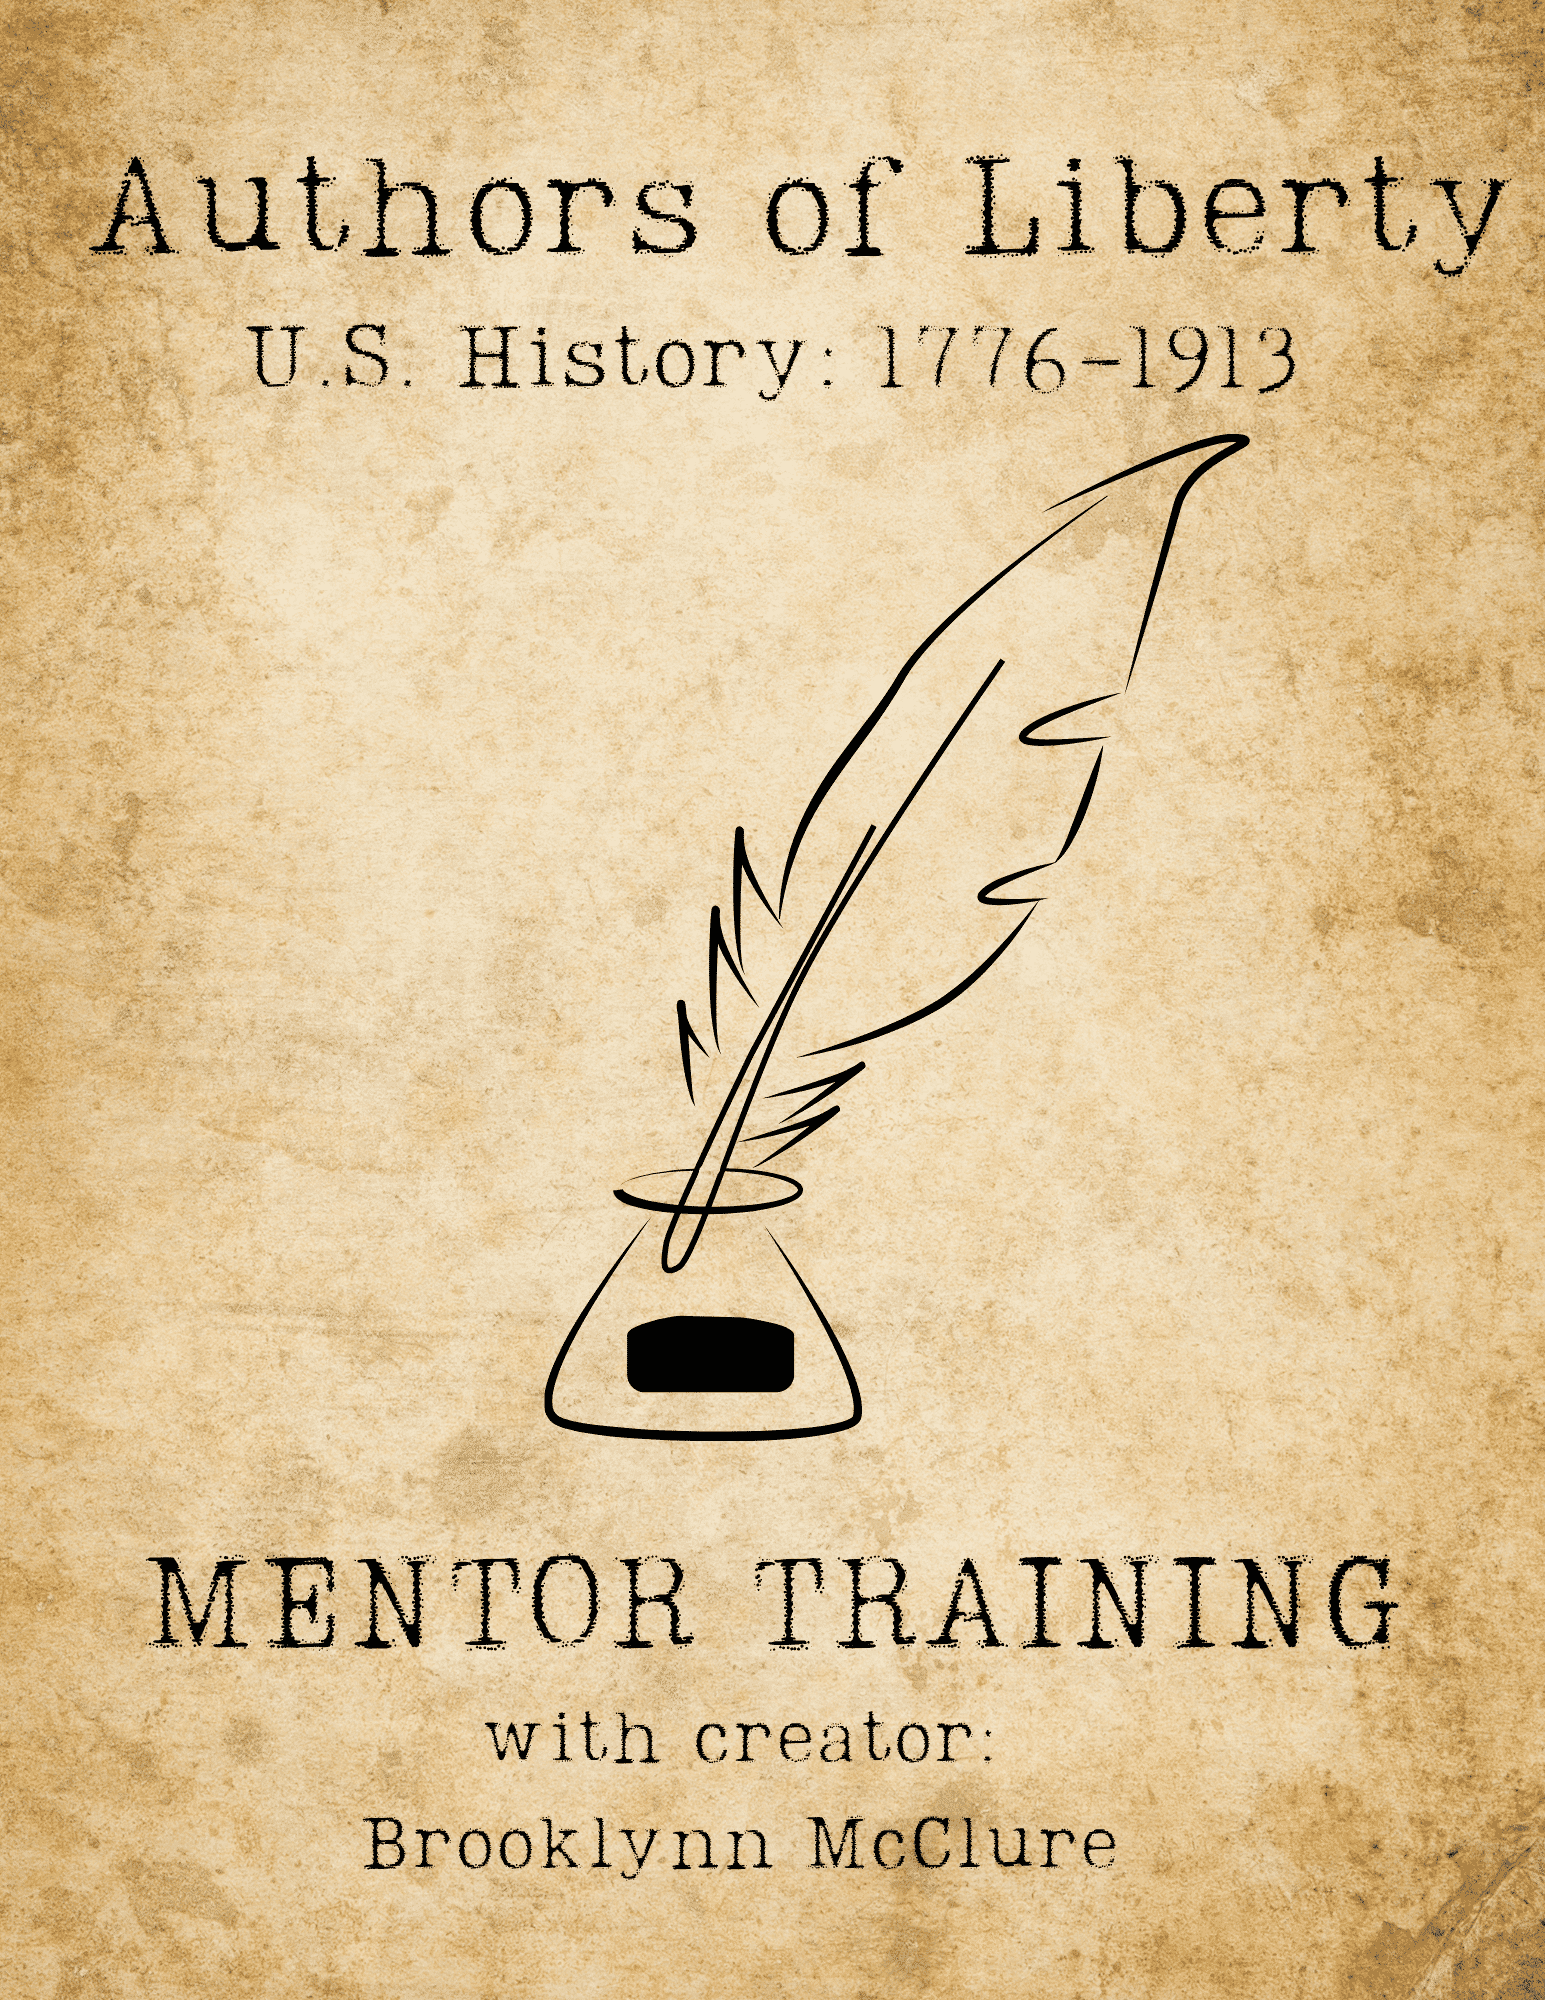 Mentor Training - Authors of Liberty